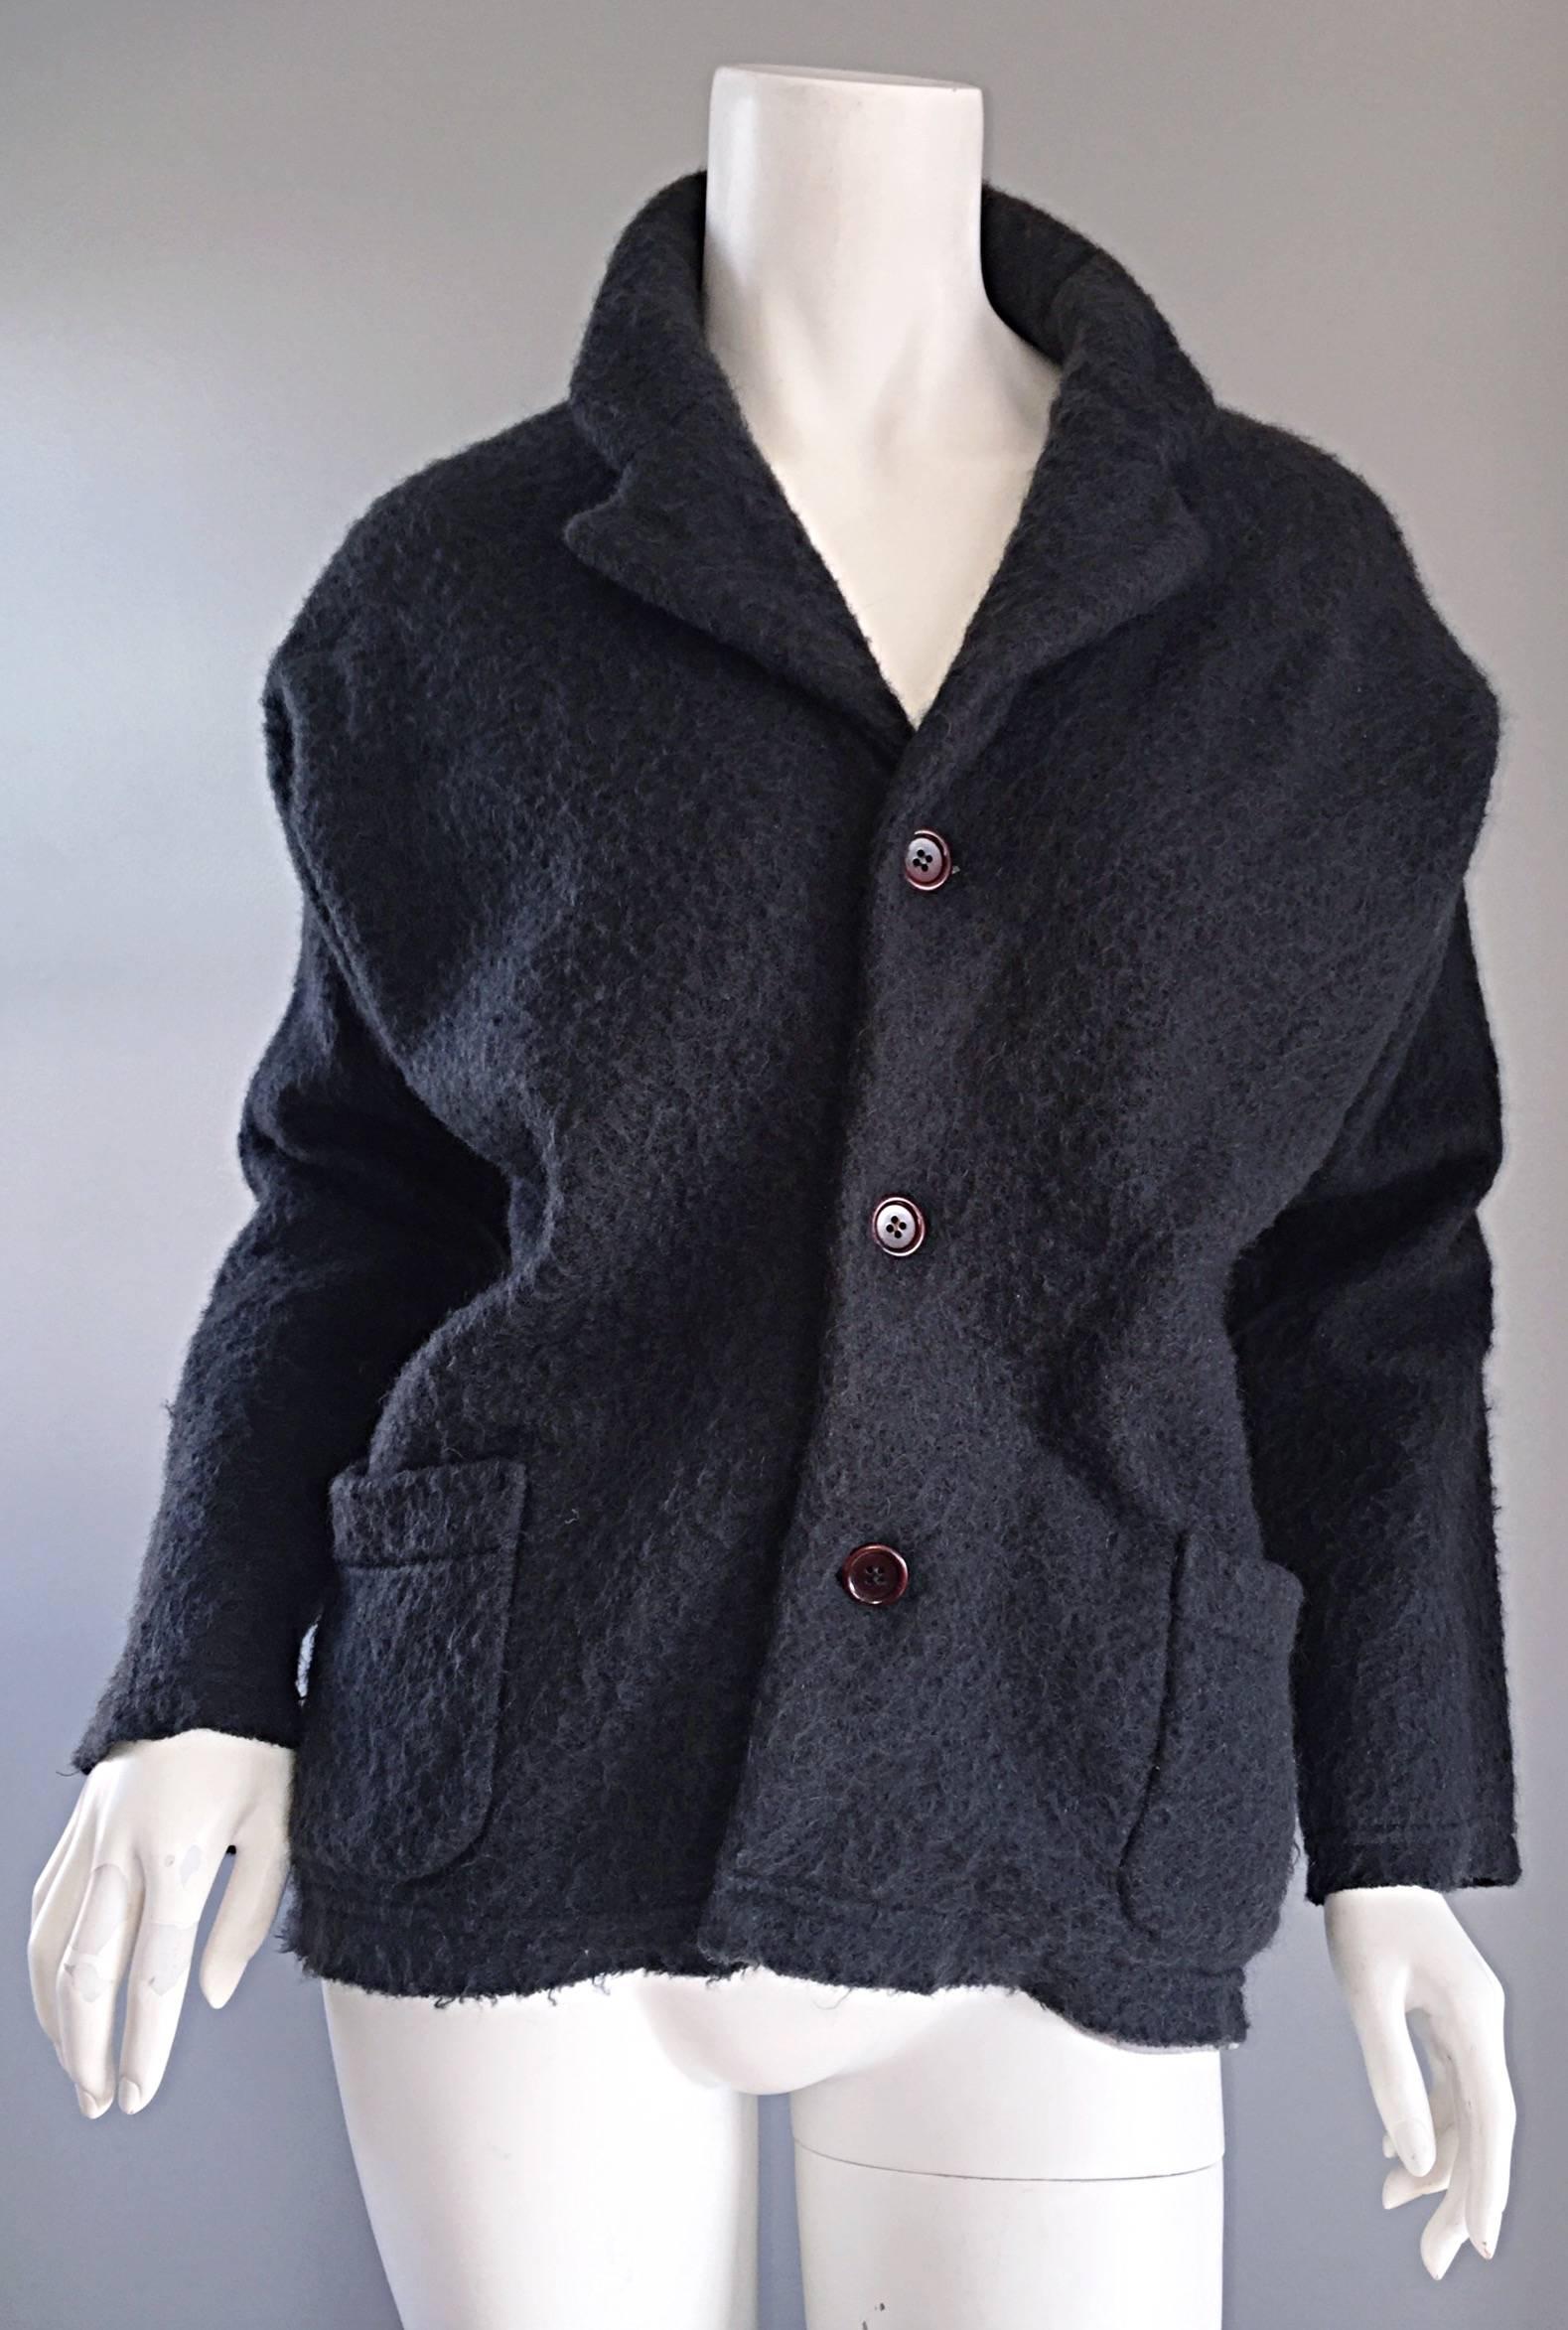 Signature vintage early 90s COMME DES GARCONS charcoal gray mohair blazer jacket! Avant Garde feel, with an asymmetrical cut that only Rei Kawakubo could produce! Effortlessly chic, with so much style, all the while being extremely cozy and